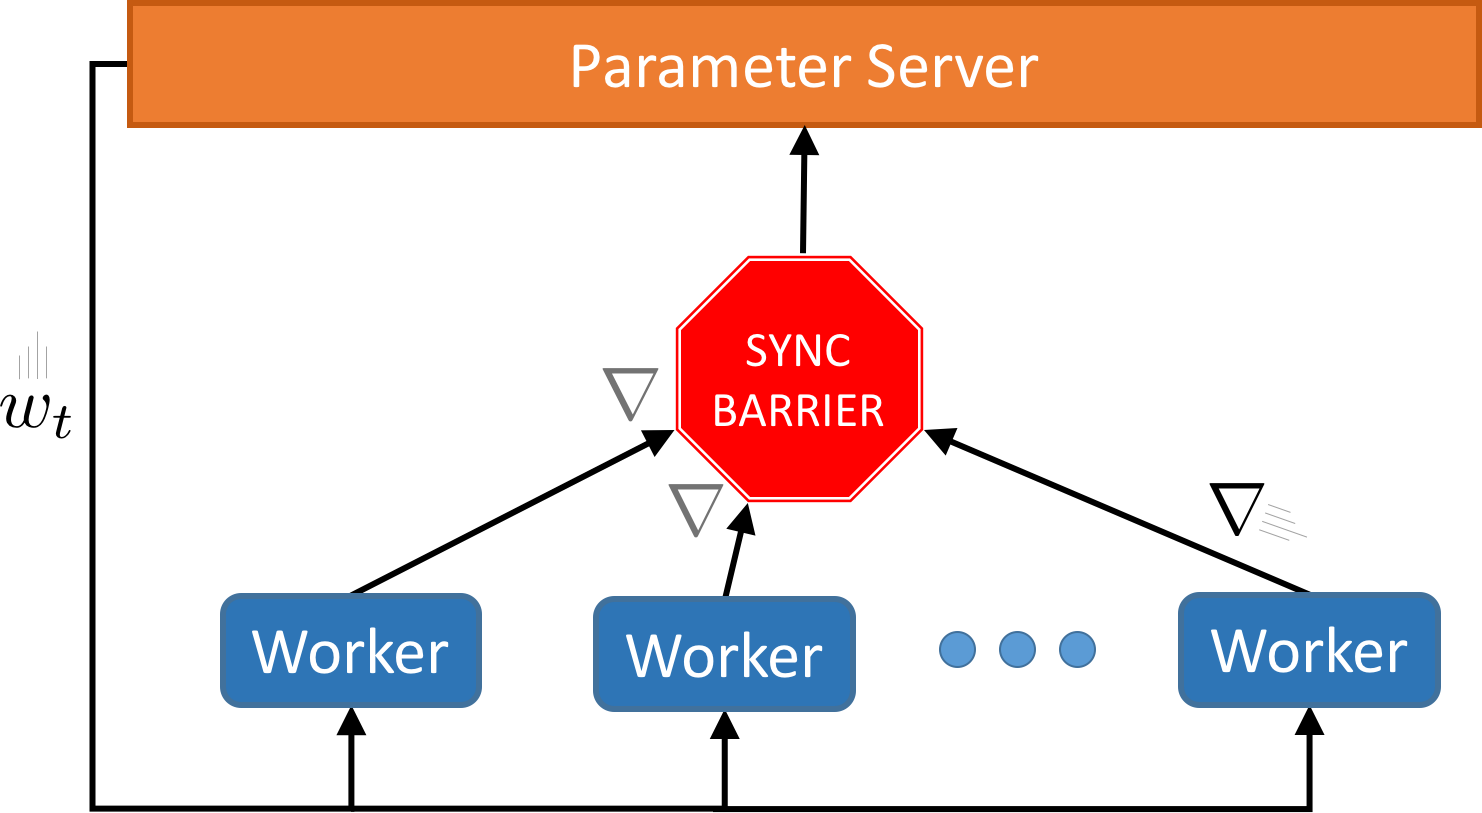 Figure 3: Synchronous parallel SGD (Source: Stanford)